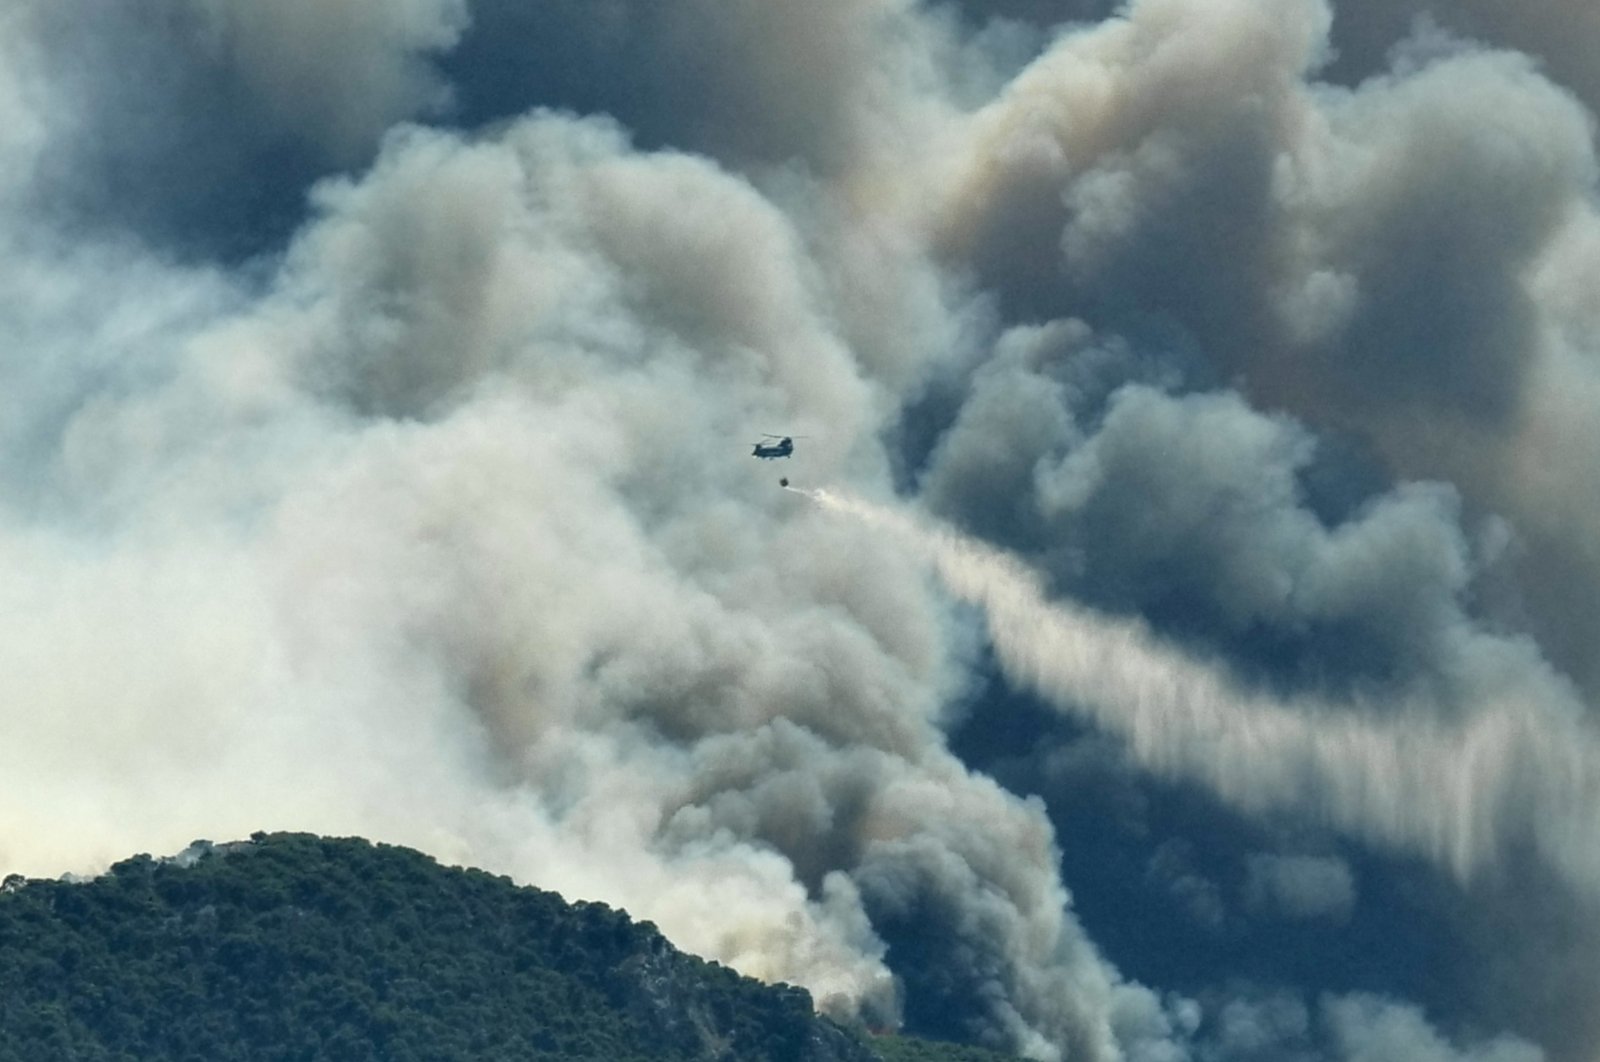 A Chinook helicopter makes a water drop as a wildfire burns near the village of Kechries, Greece, July 22, 2020. (Reuters Photo)